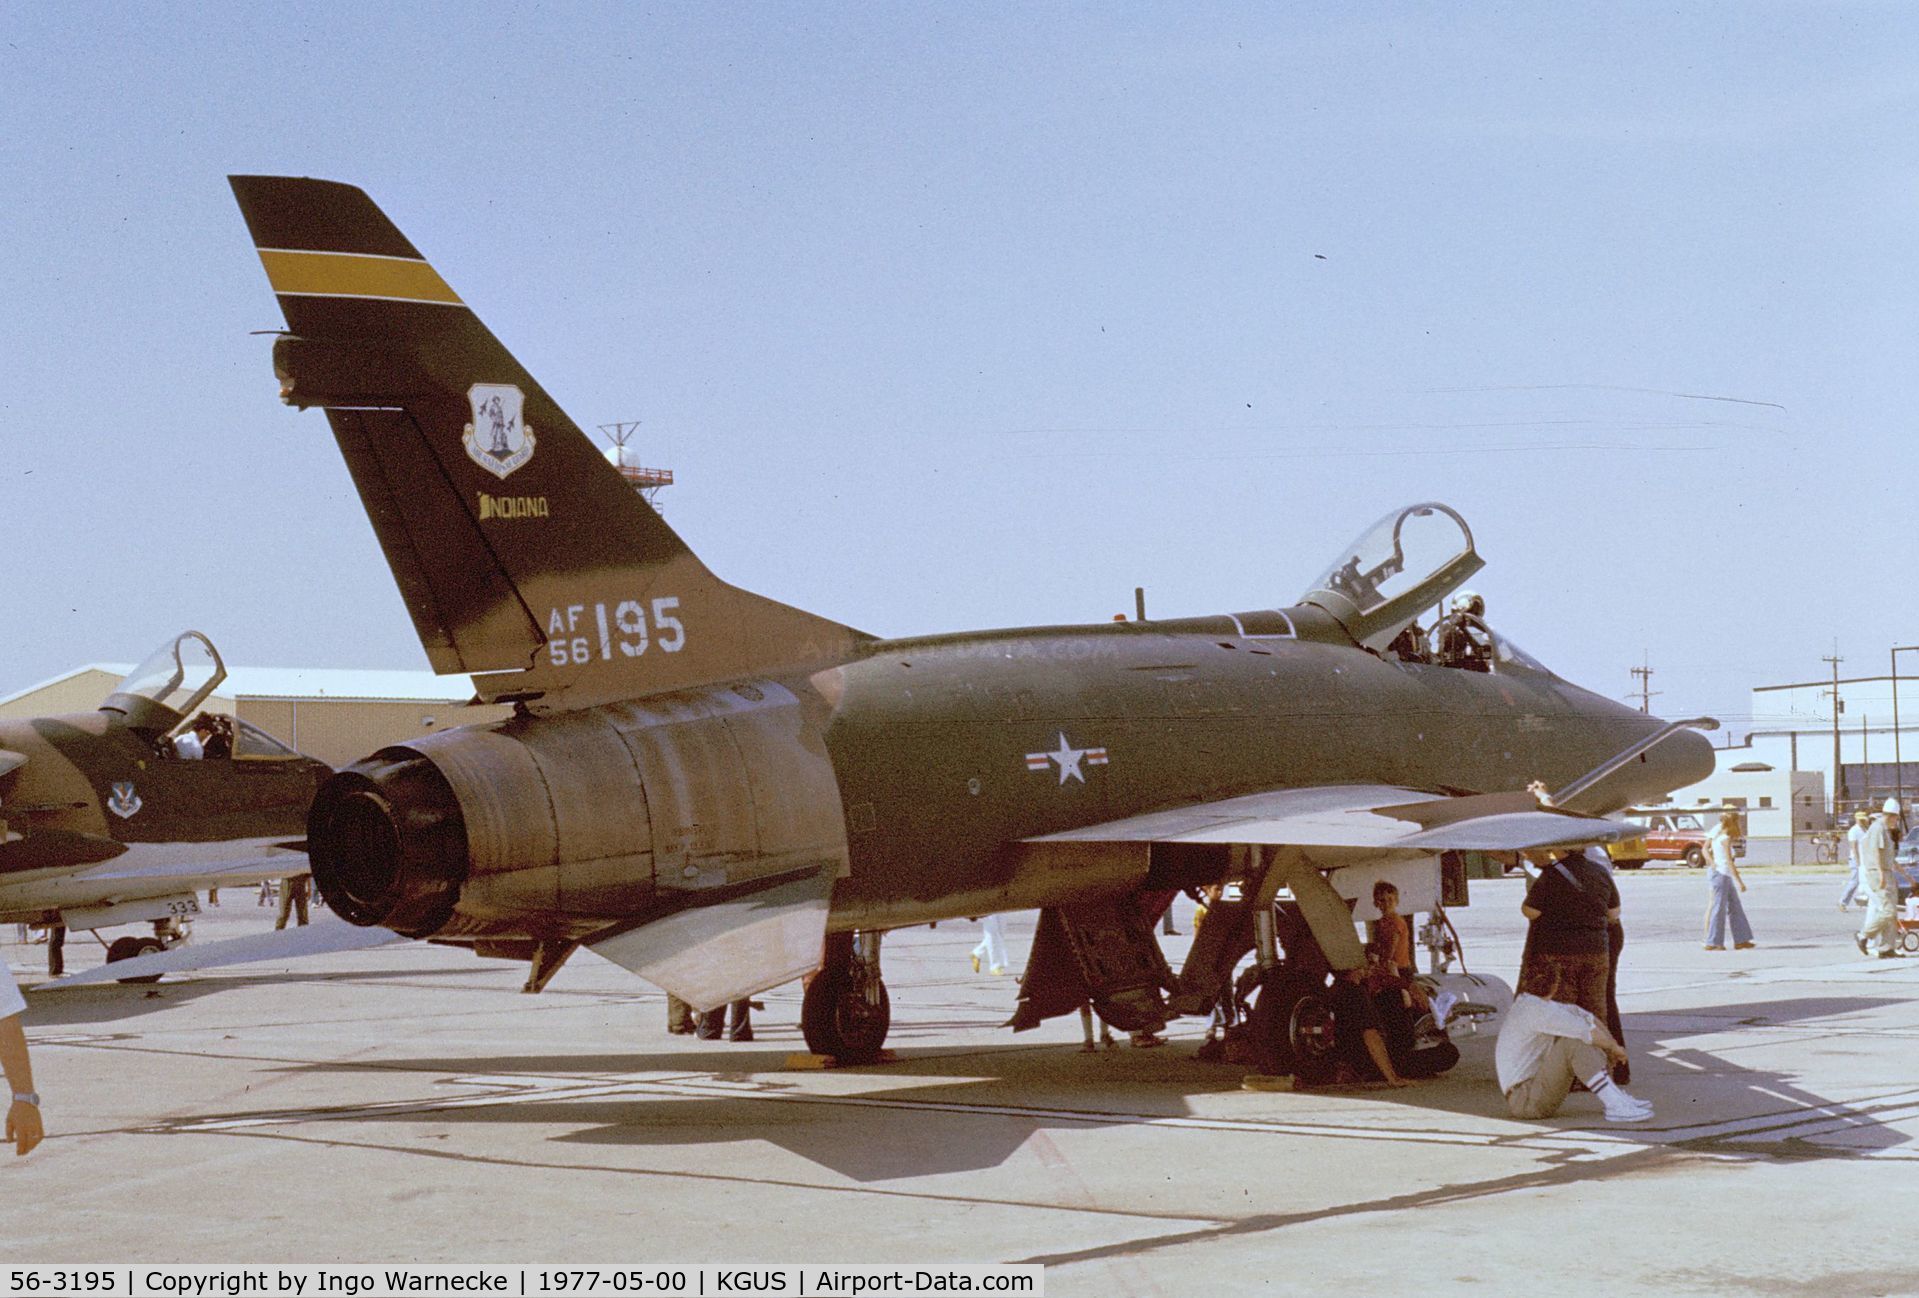 56-3195, North American F-100D C/N unknown_56-3195, North American F-100D Super Sabre of the USAF at the 1977 airshow at Grissom AFB, Peru IN